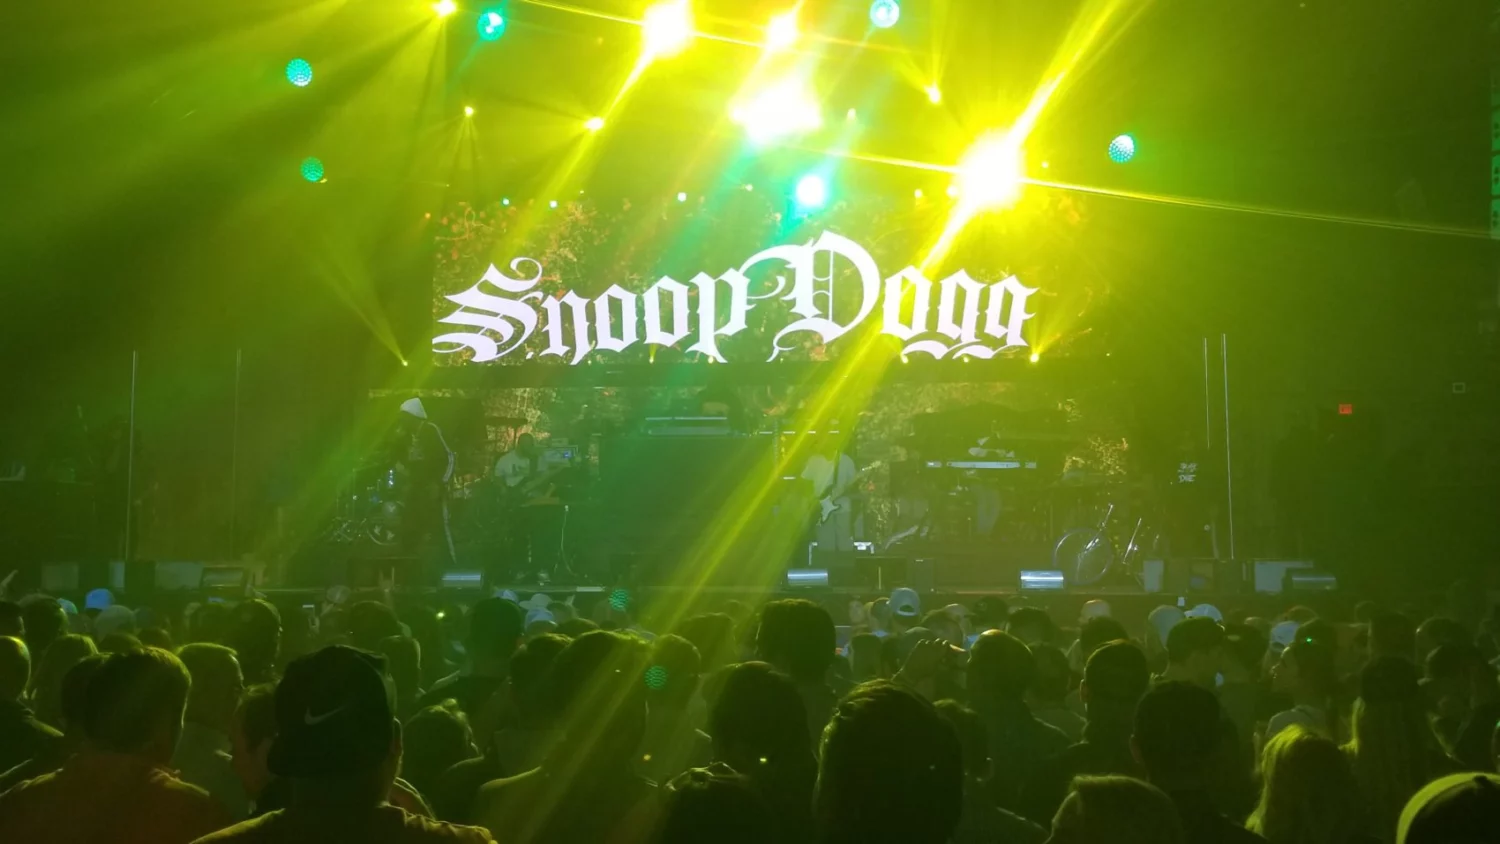 Image of LED display at Snoop Dogg Performance